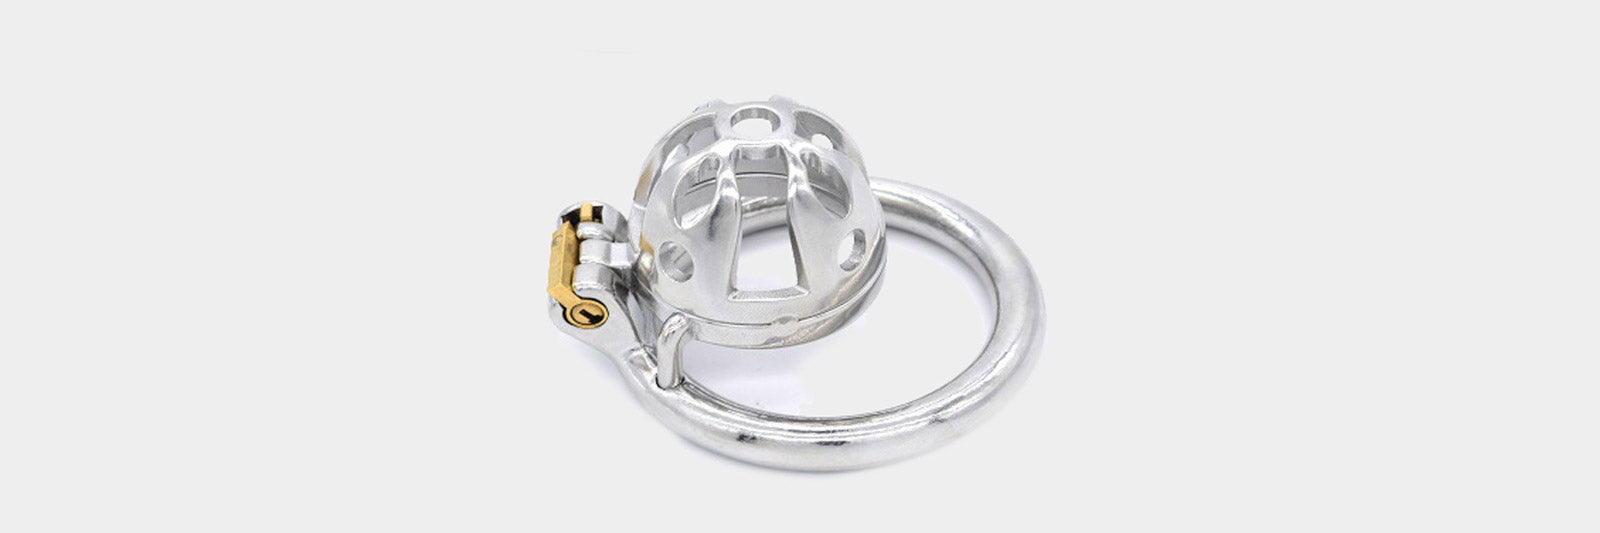 A very small chastity worn by men